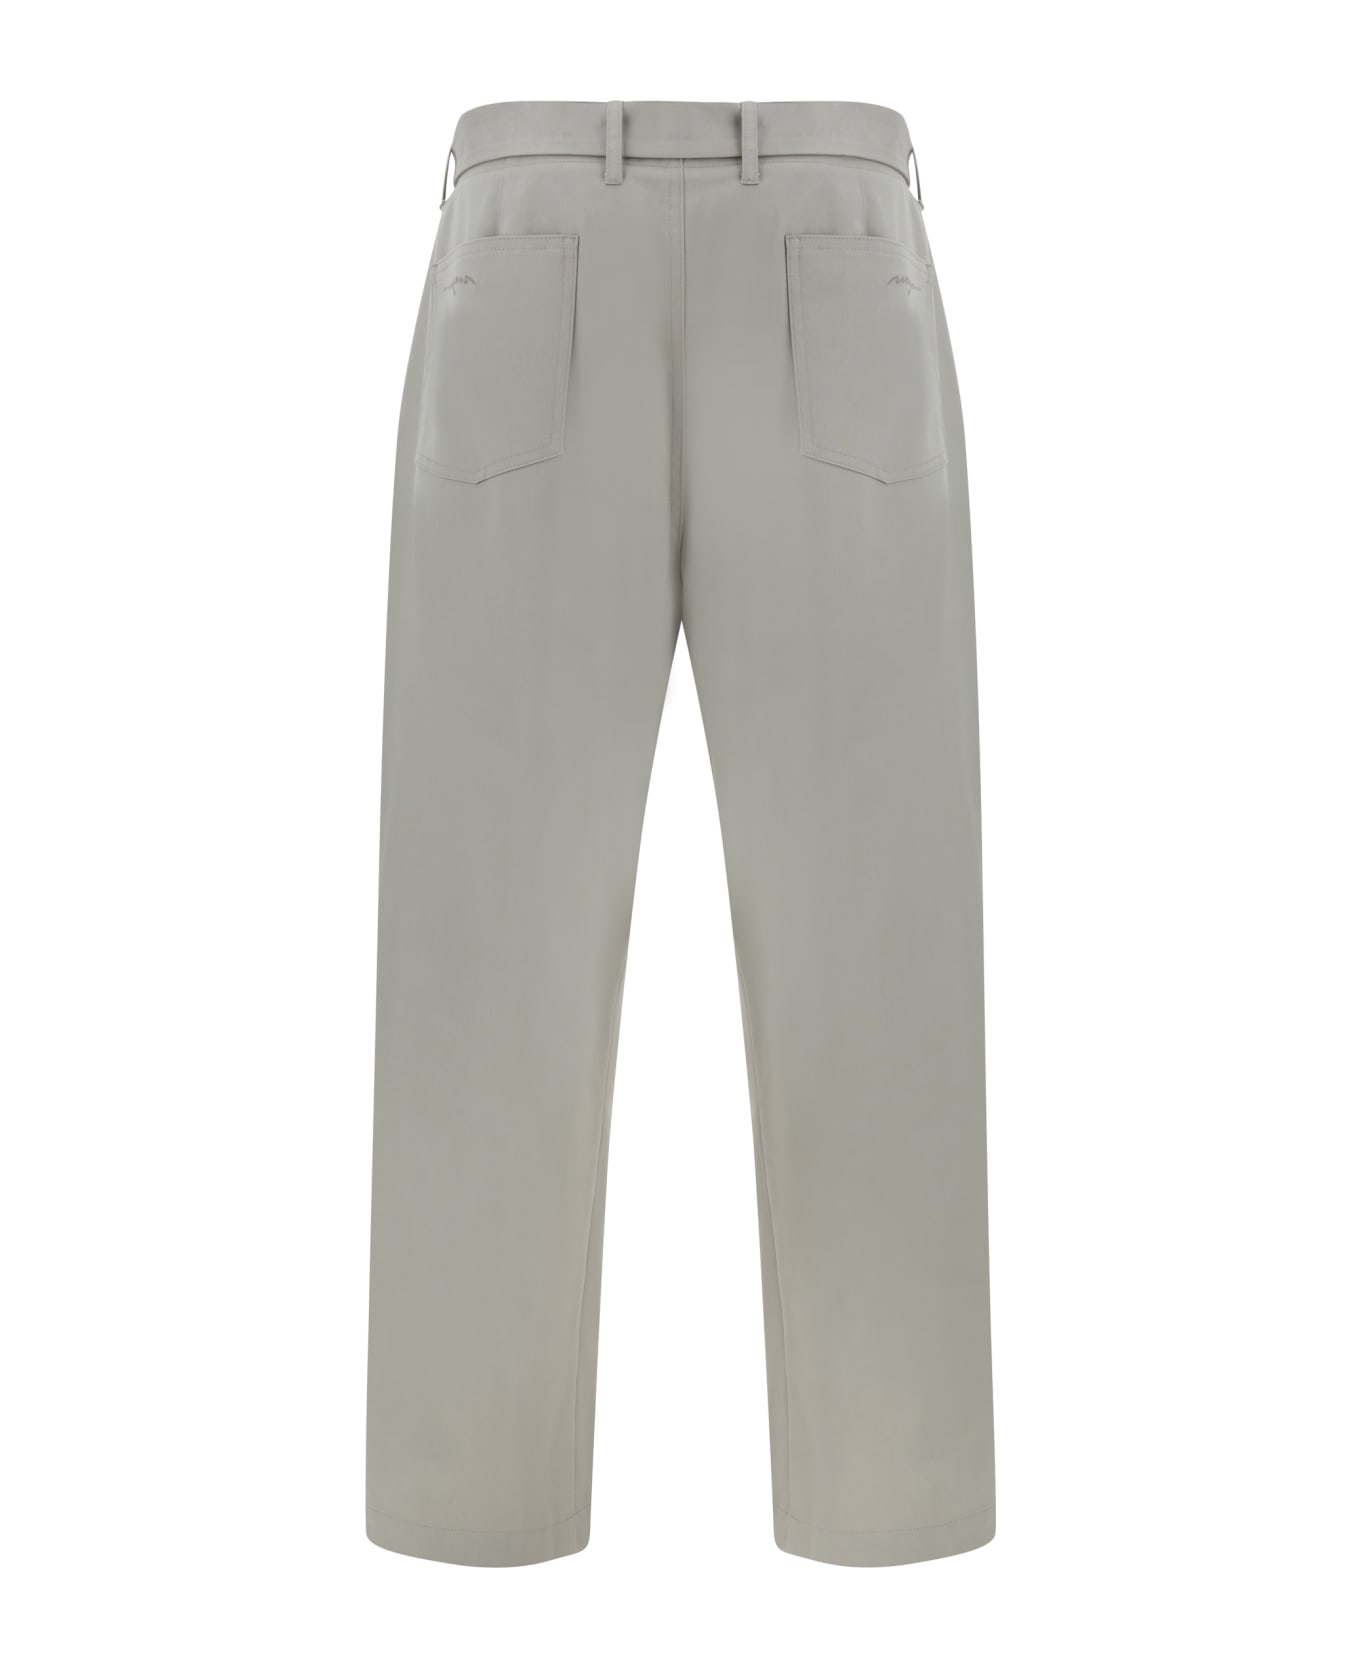 MSGM Belted Trousers - Light Grey